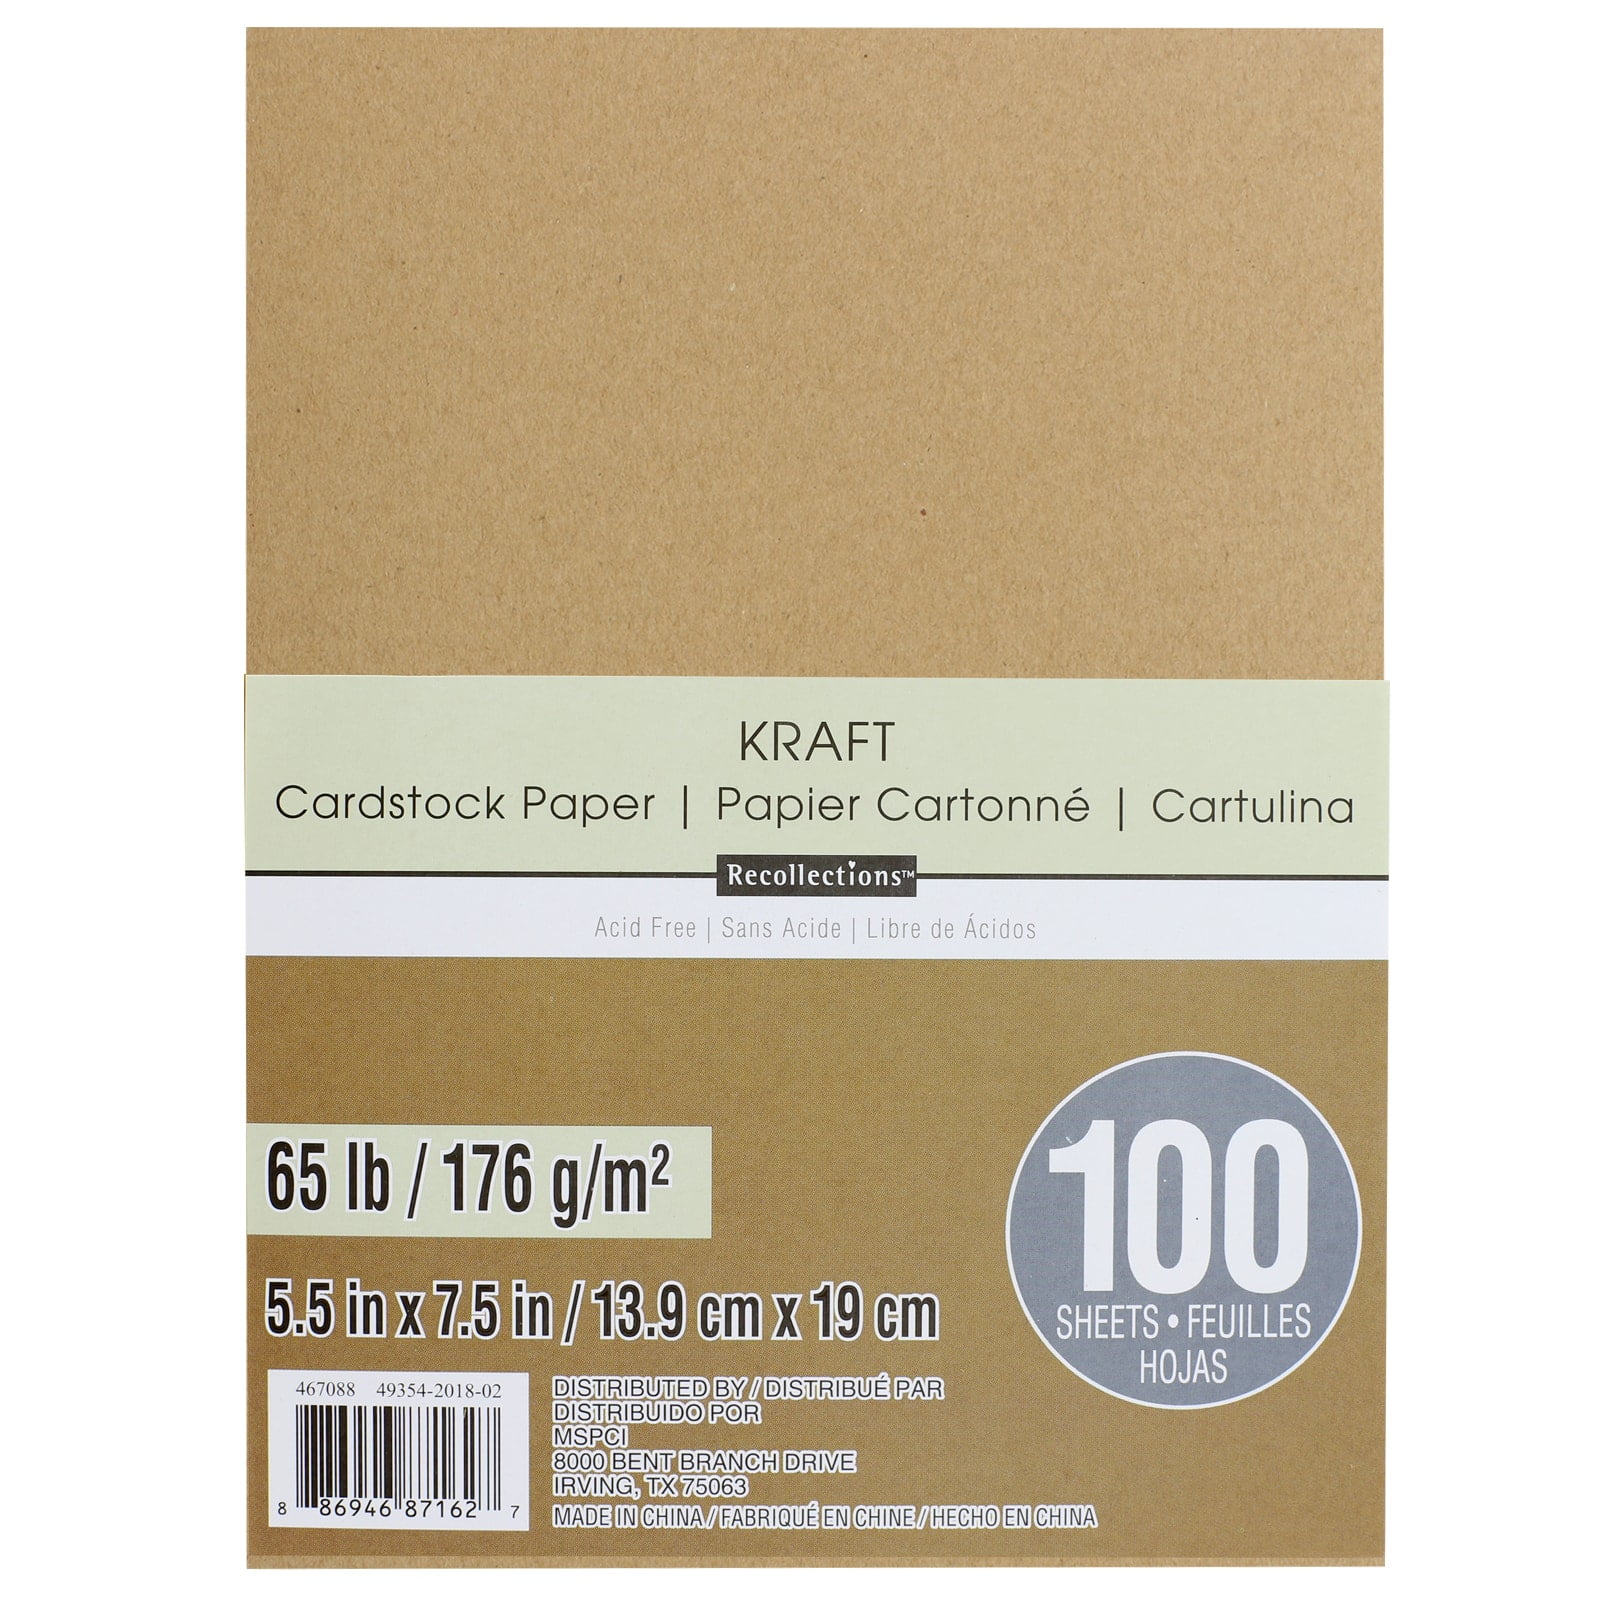 Recollections Cardstock Paper, 8 1/2, Bright Essentials, 200 Sheets